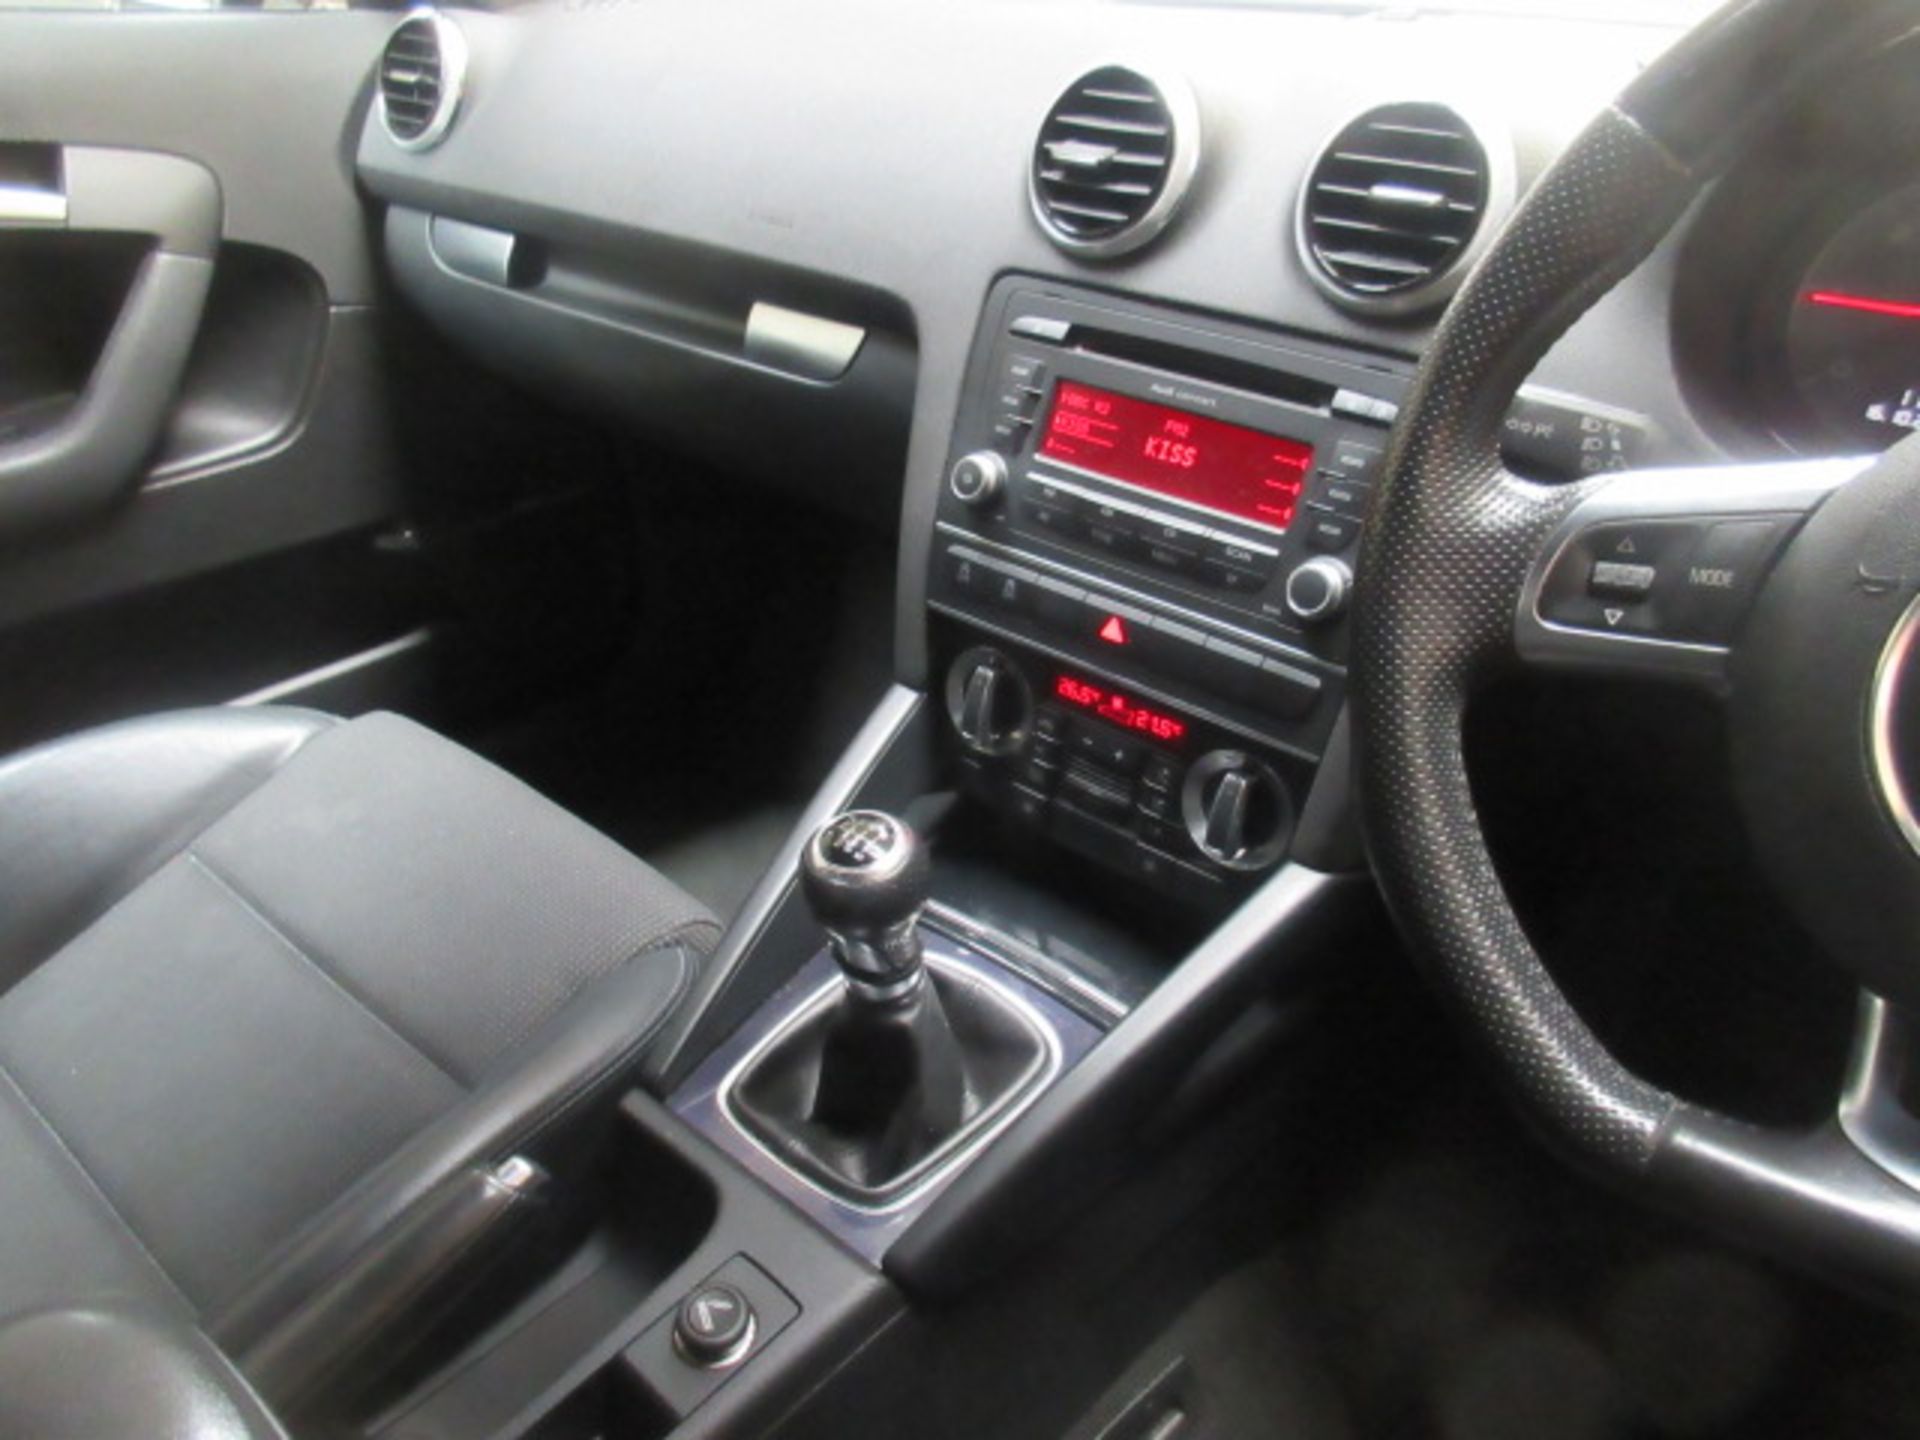 11 11 Audi A3 S Line Sp Edition TDI - Image 6 of 7